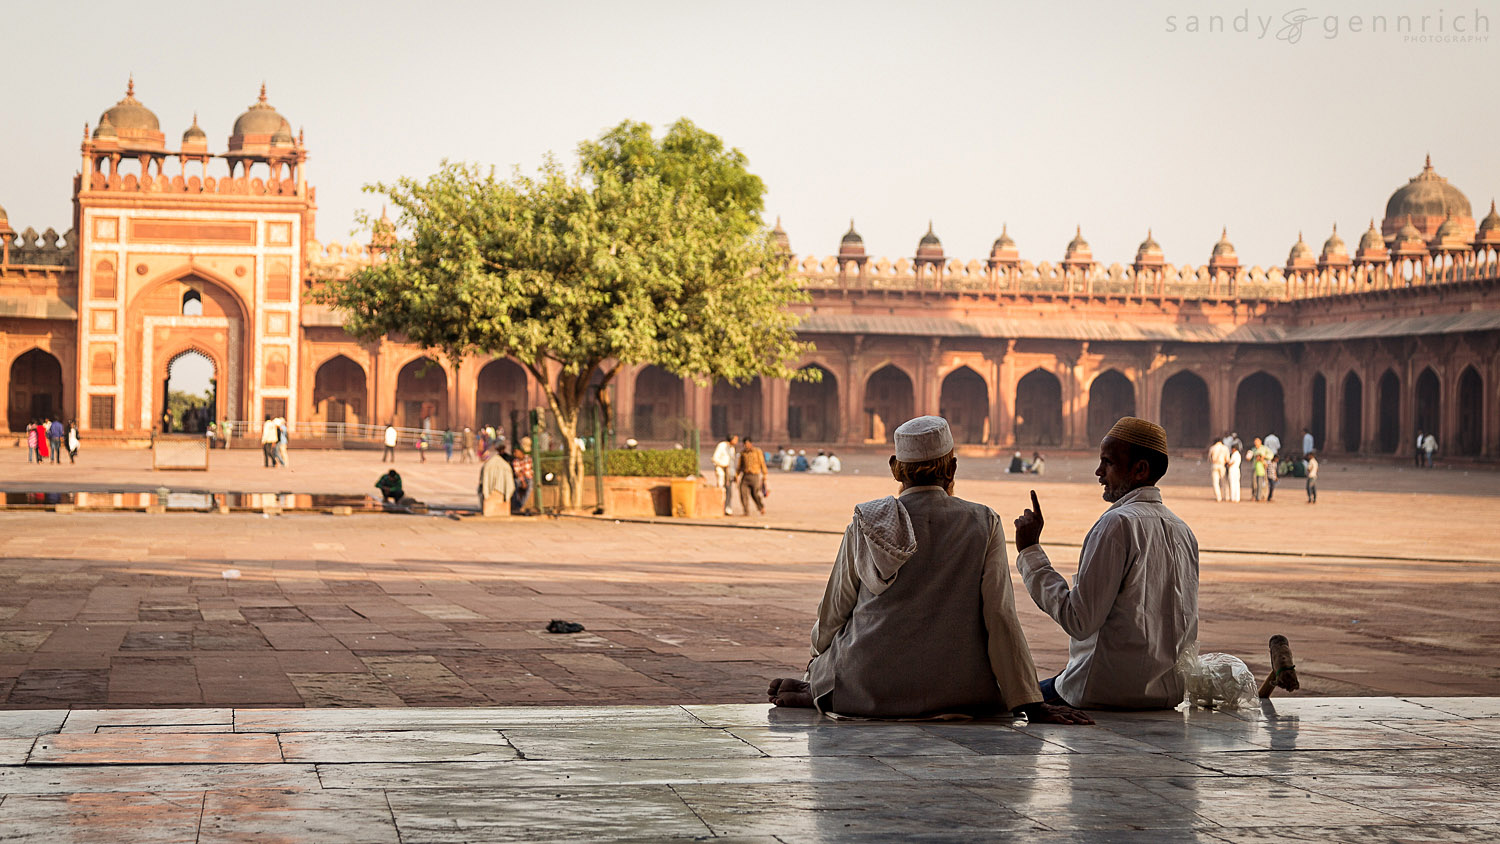 Let Me Tell You This-Fatehpur Sikri